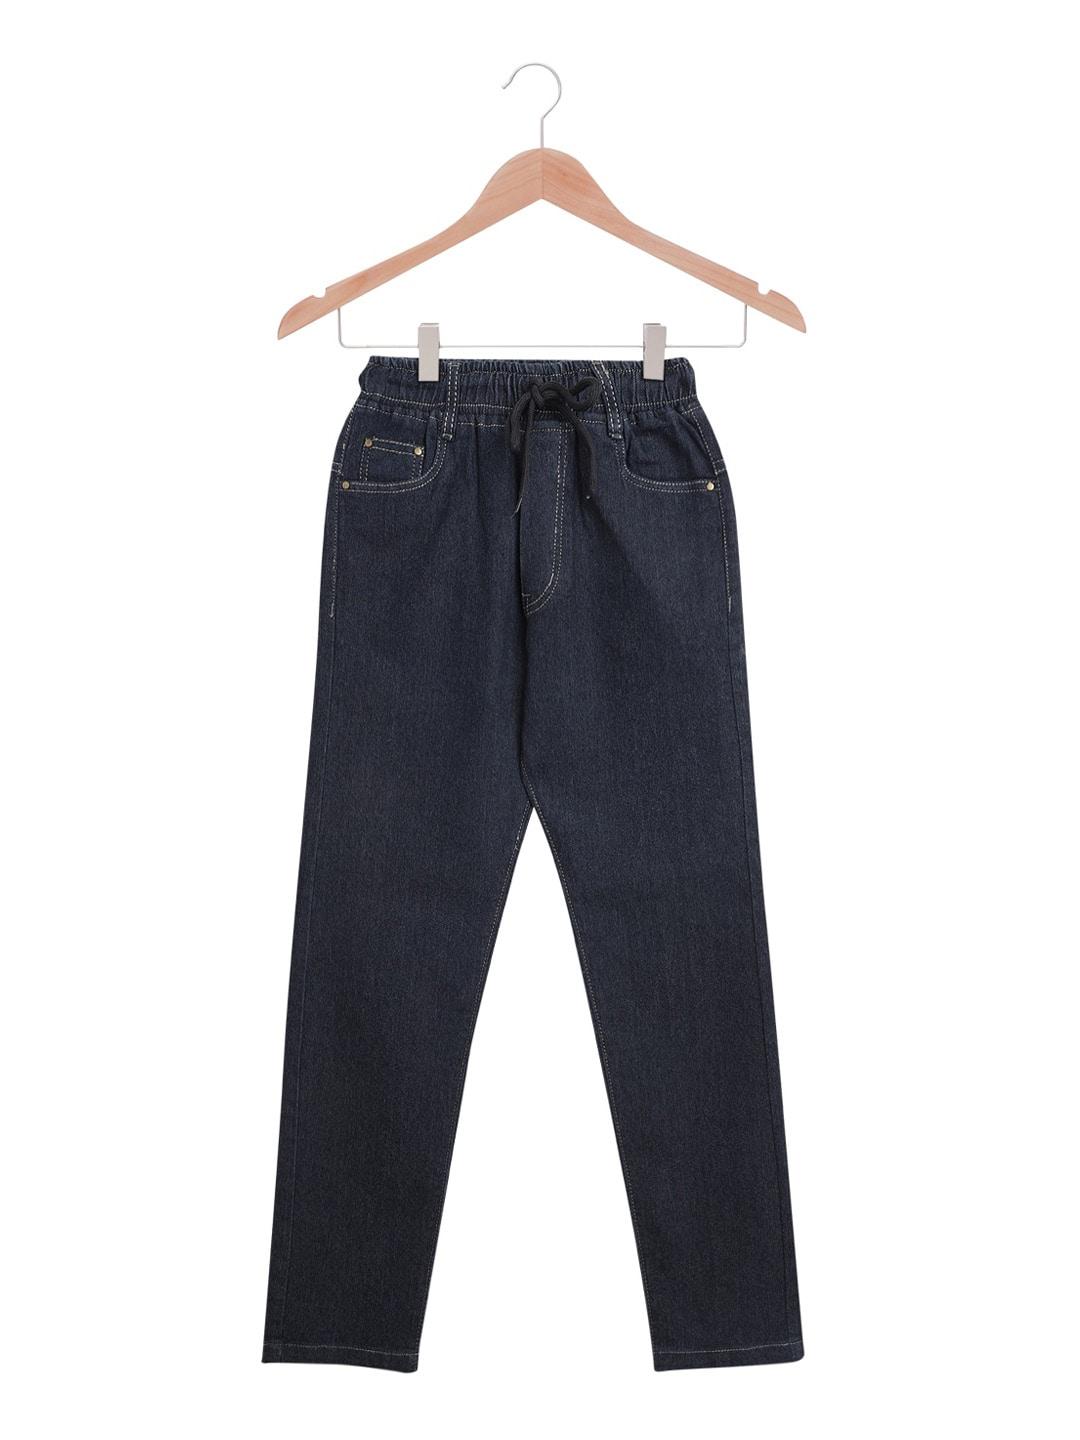 killer-boys-mid-rise-stretchable-jeans